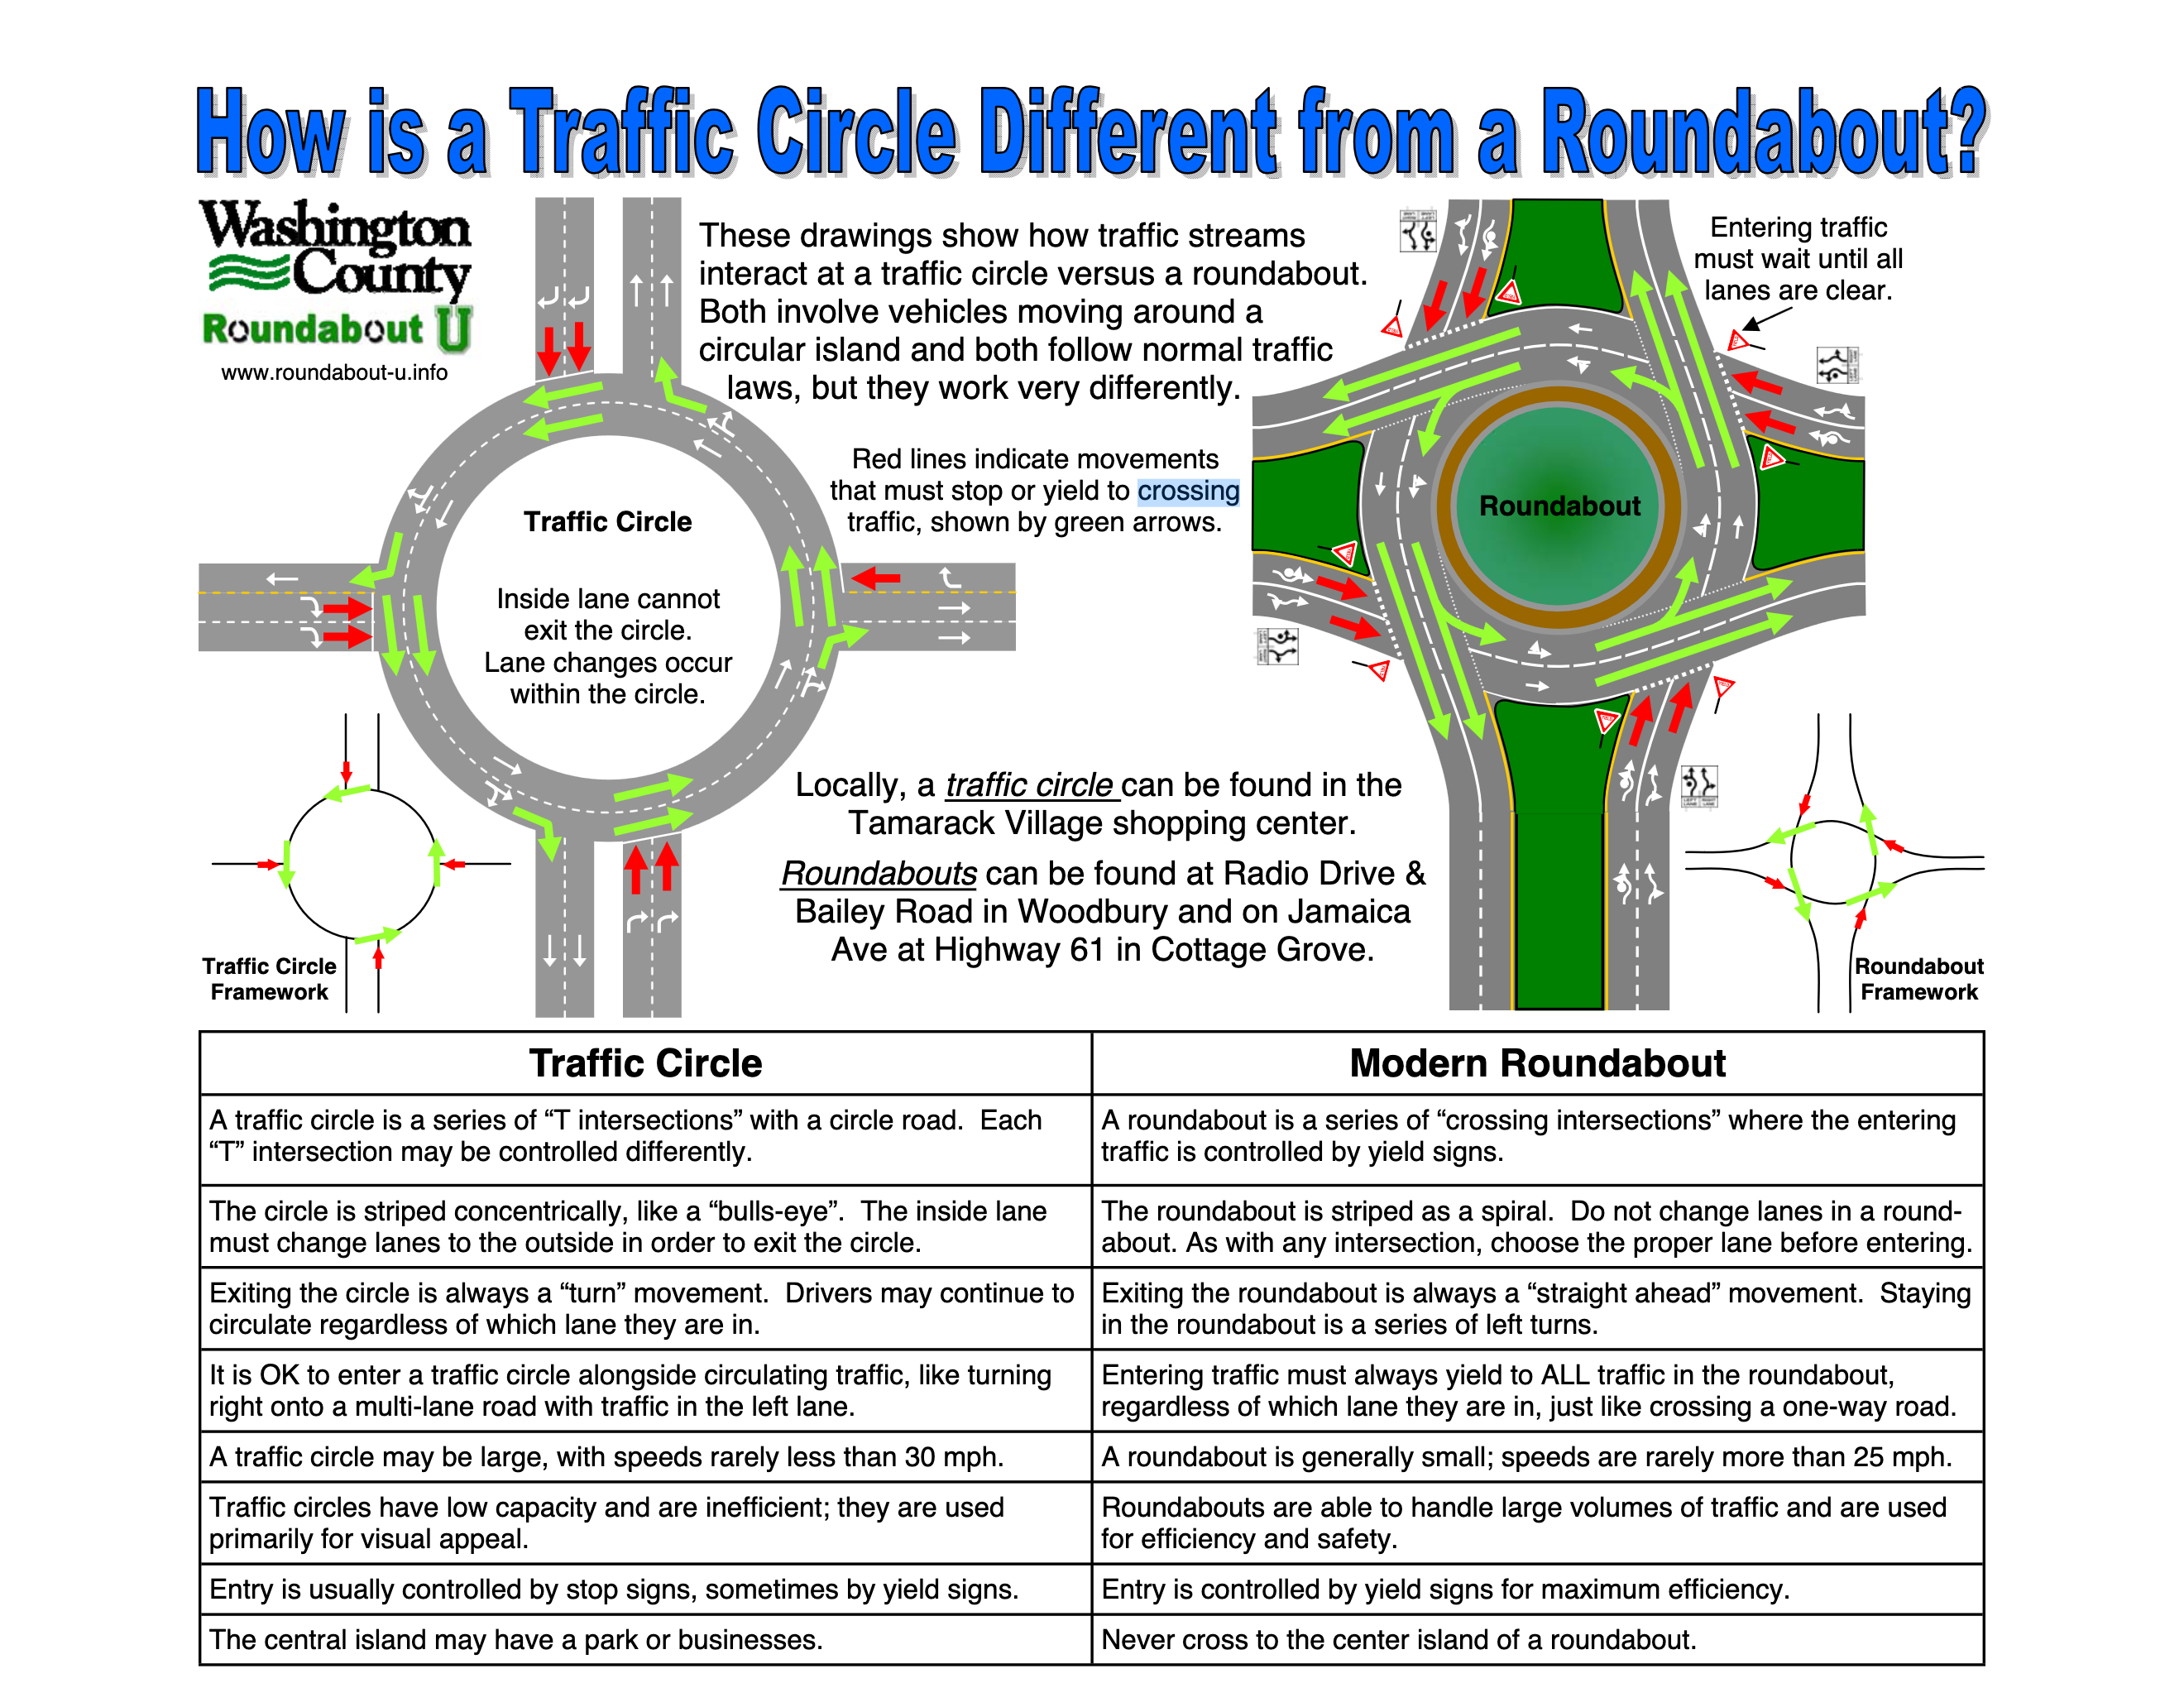 How is a Traffic Circle Different from a Roundabout diagram